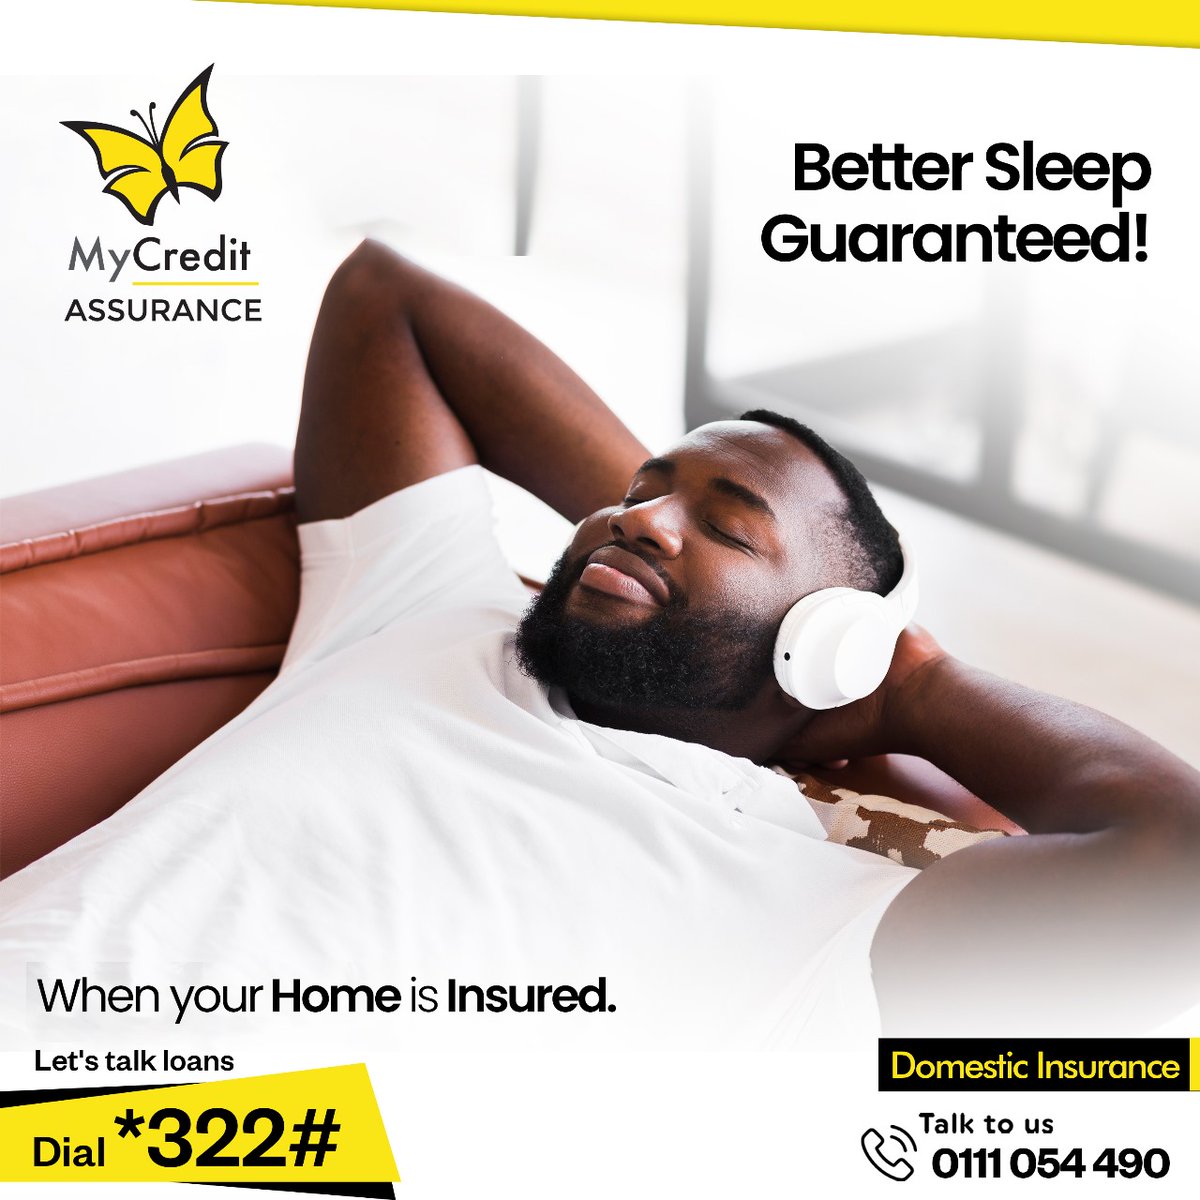 Imagine waking up feeling refreshed, knowing your home is protected. Let us have a talk. #mycredit #YourGrowthPartner